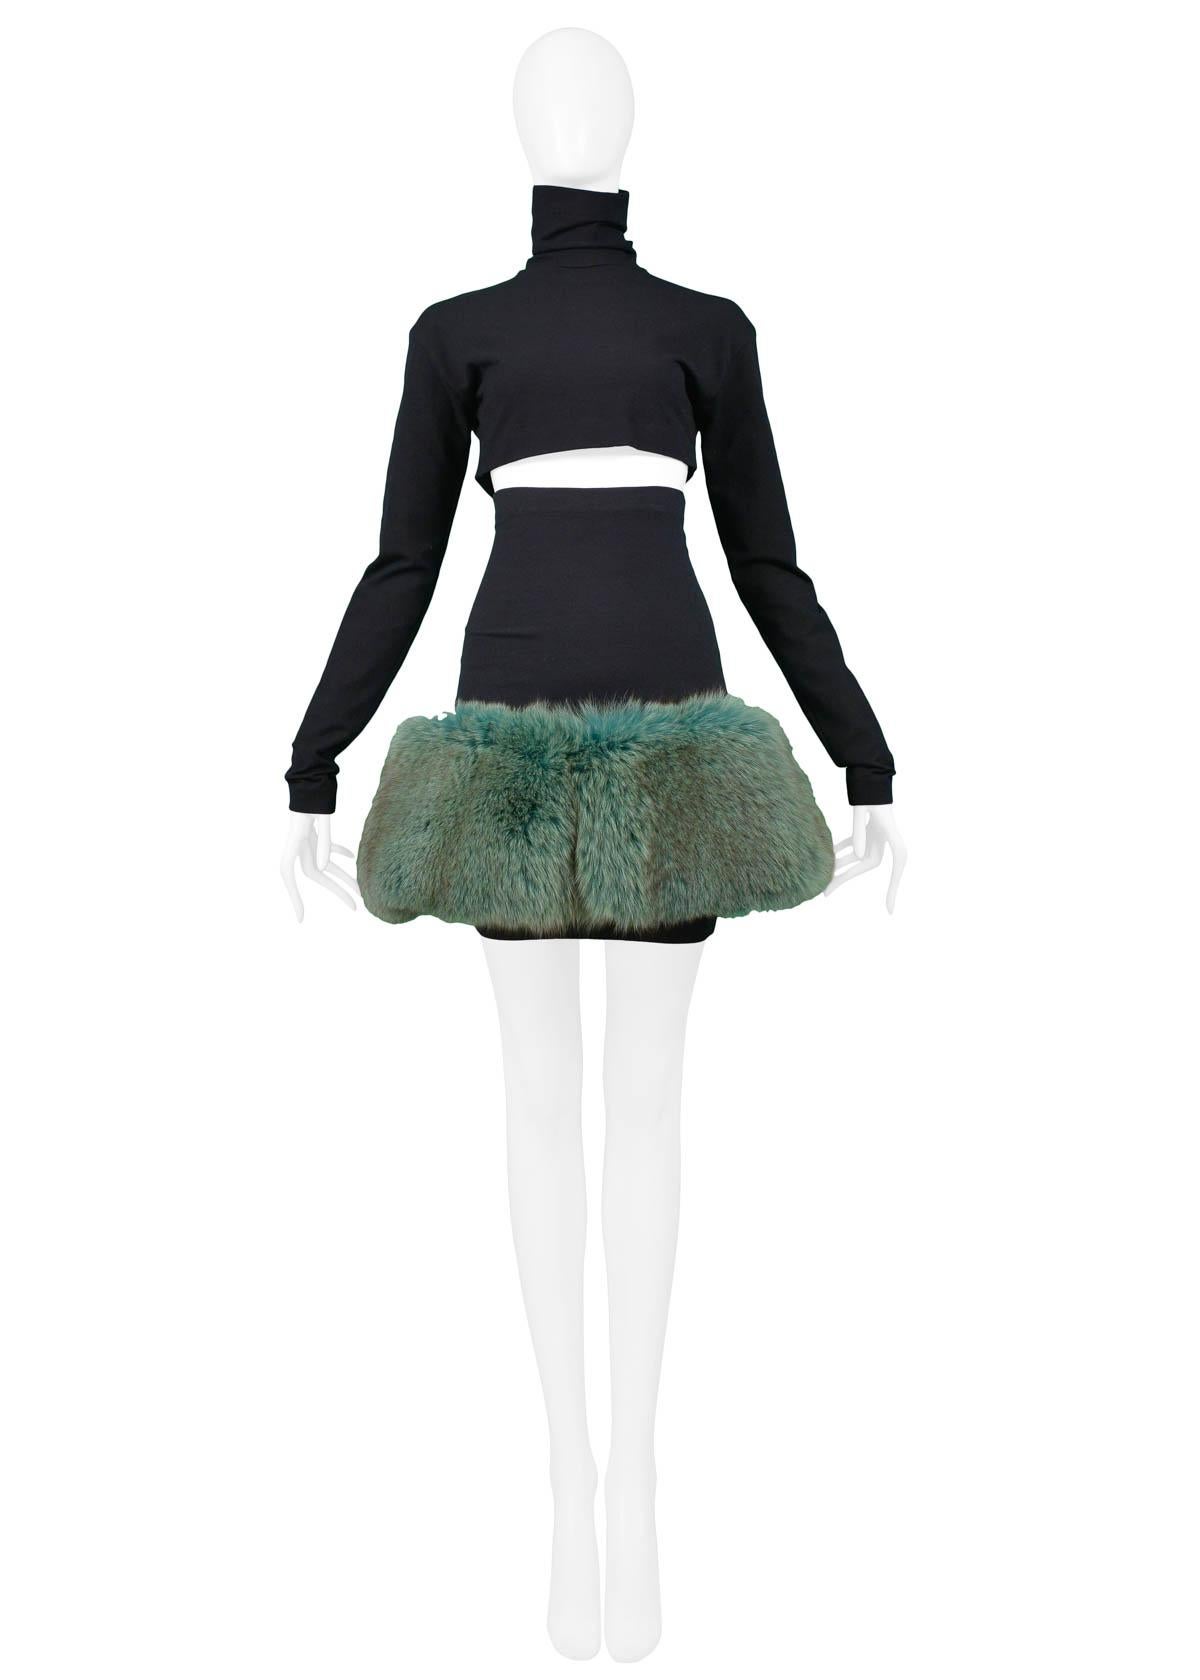 Vintage Complice black wool knit top and skirt ensemble. The set features a long sleeve high neck crop top with center back zipper closure and high waisted mini skirt adorned with jade green colored mink at hem. Runway piece from the 1991